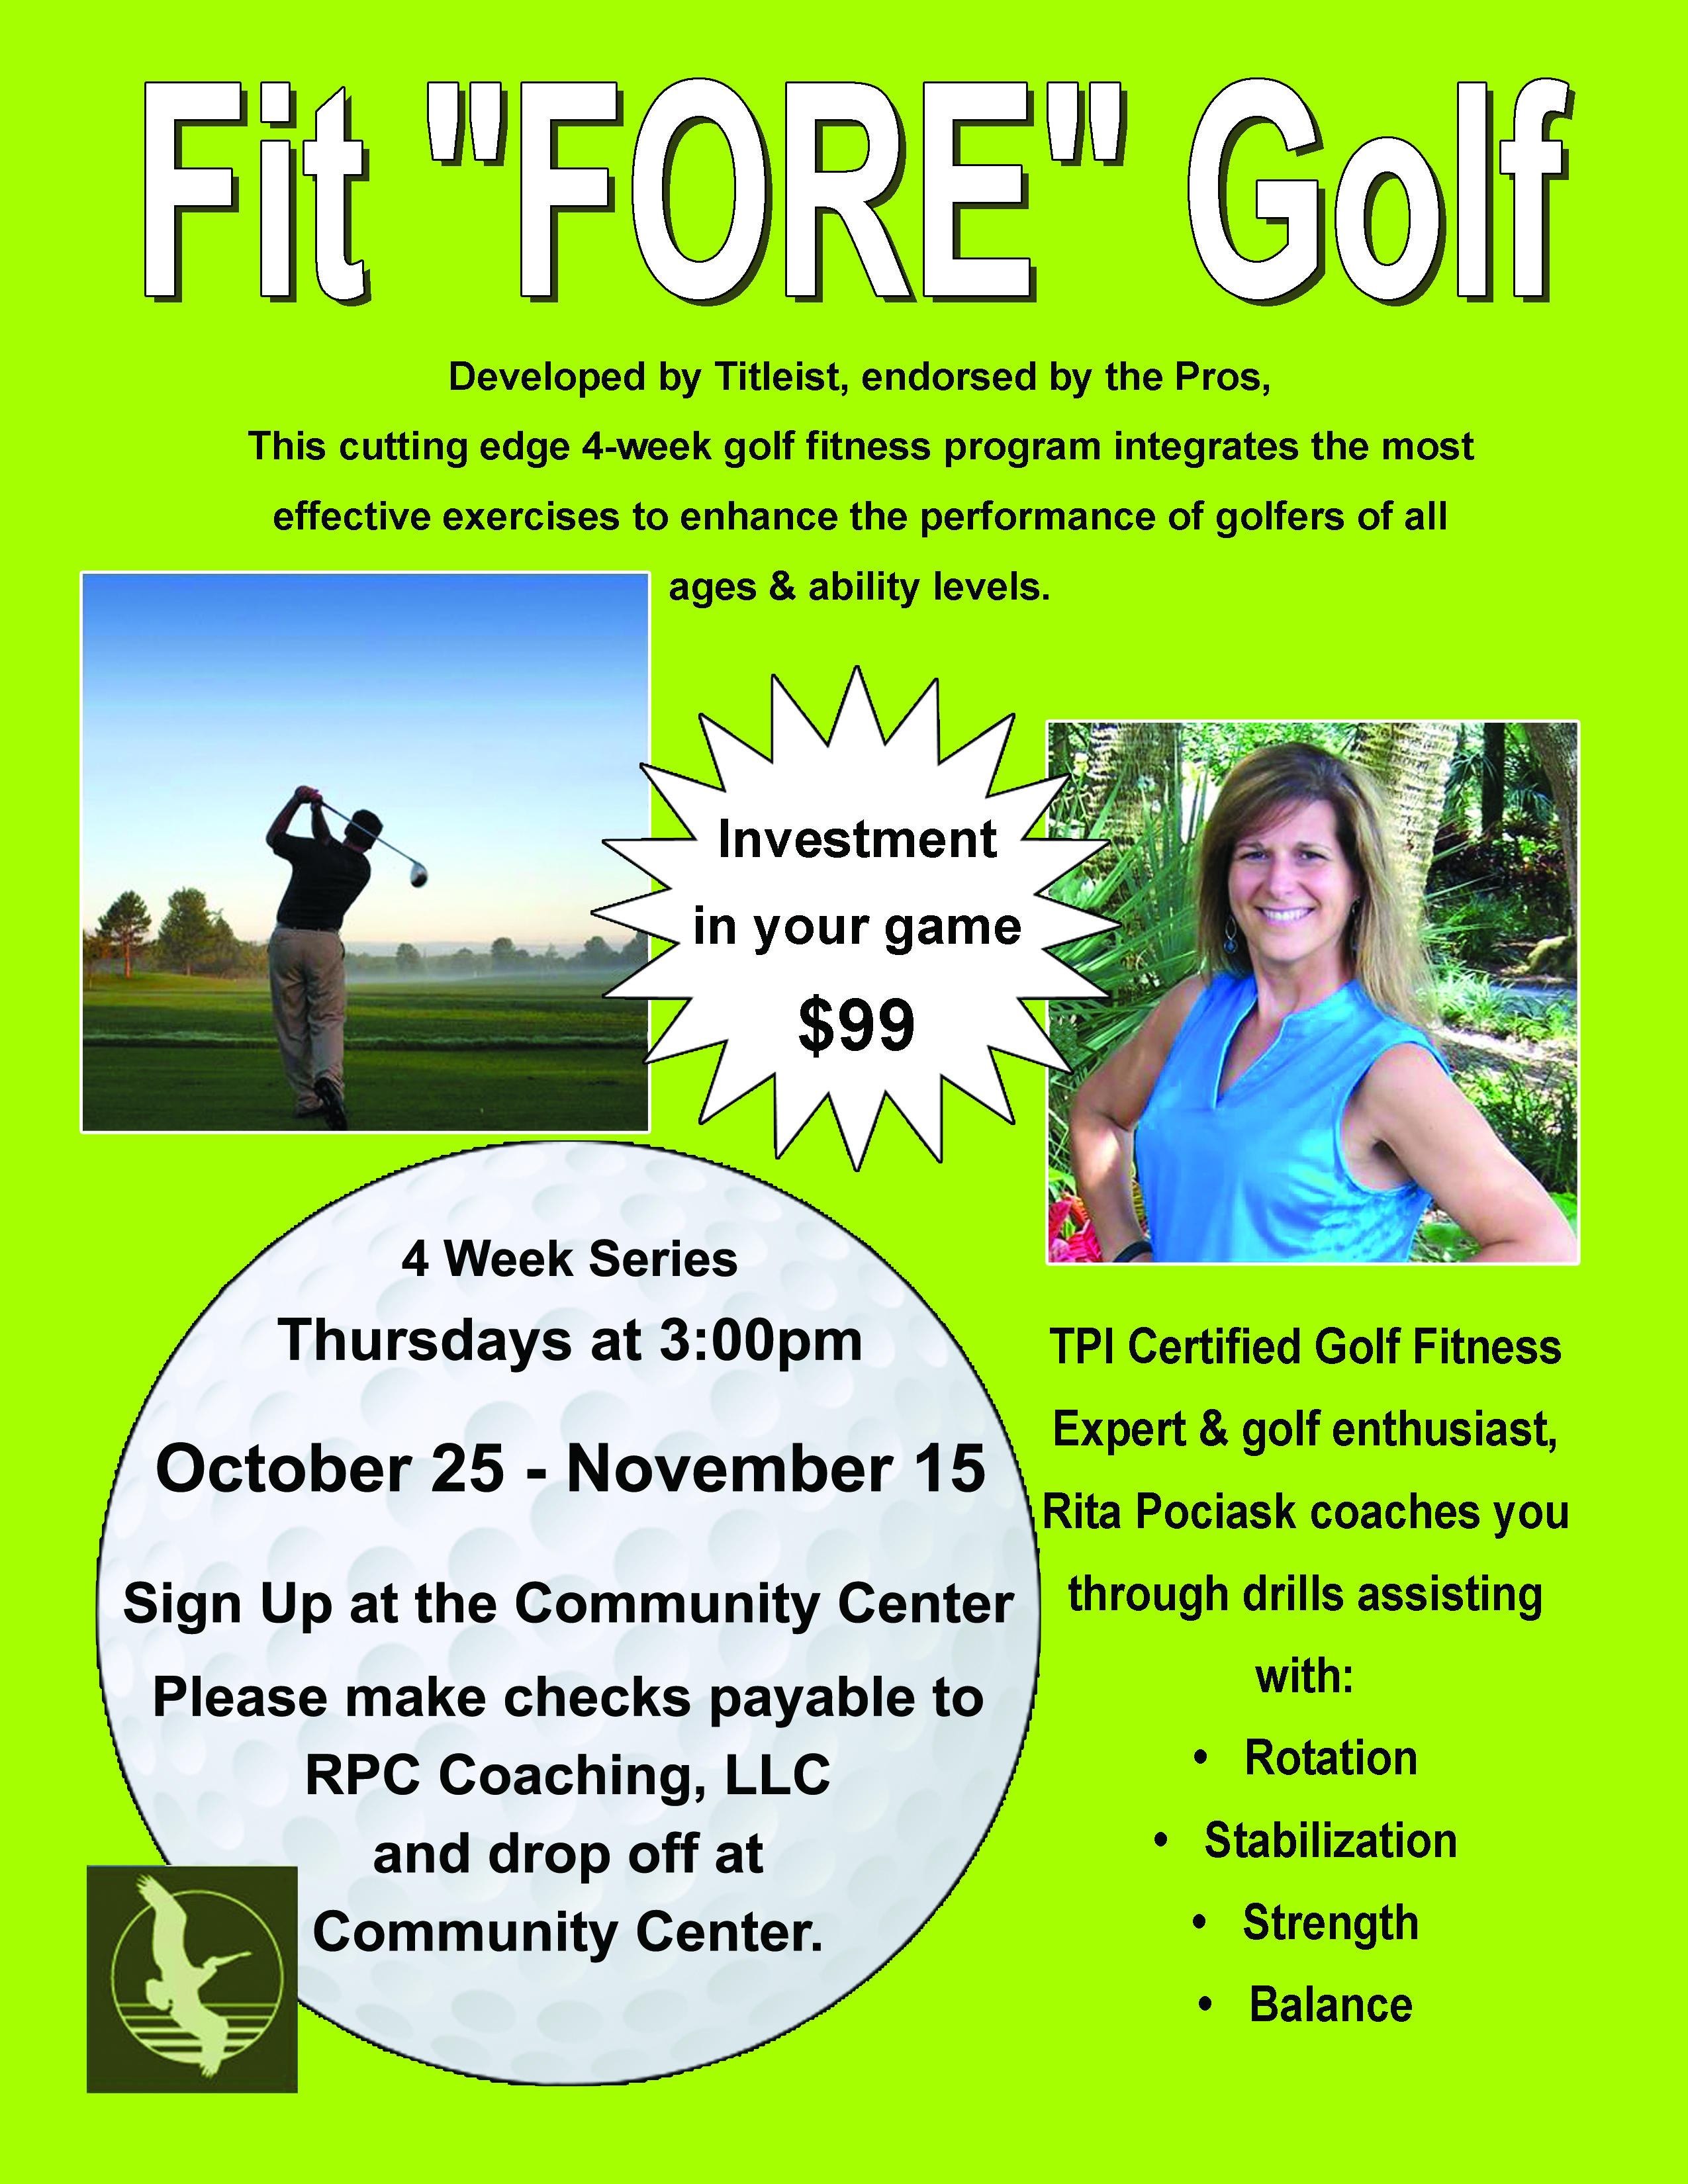 Fit Fore Golf - Pelican Landing - Fall 2018